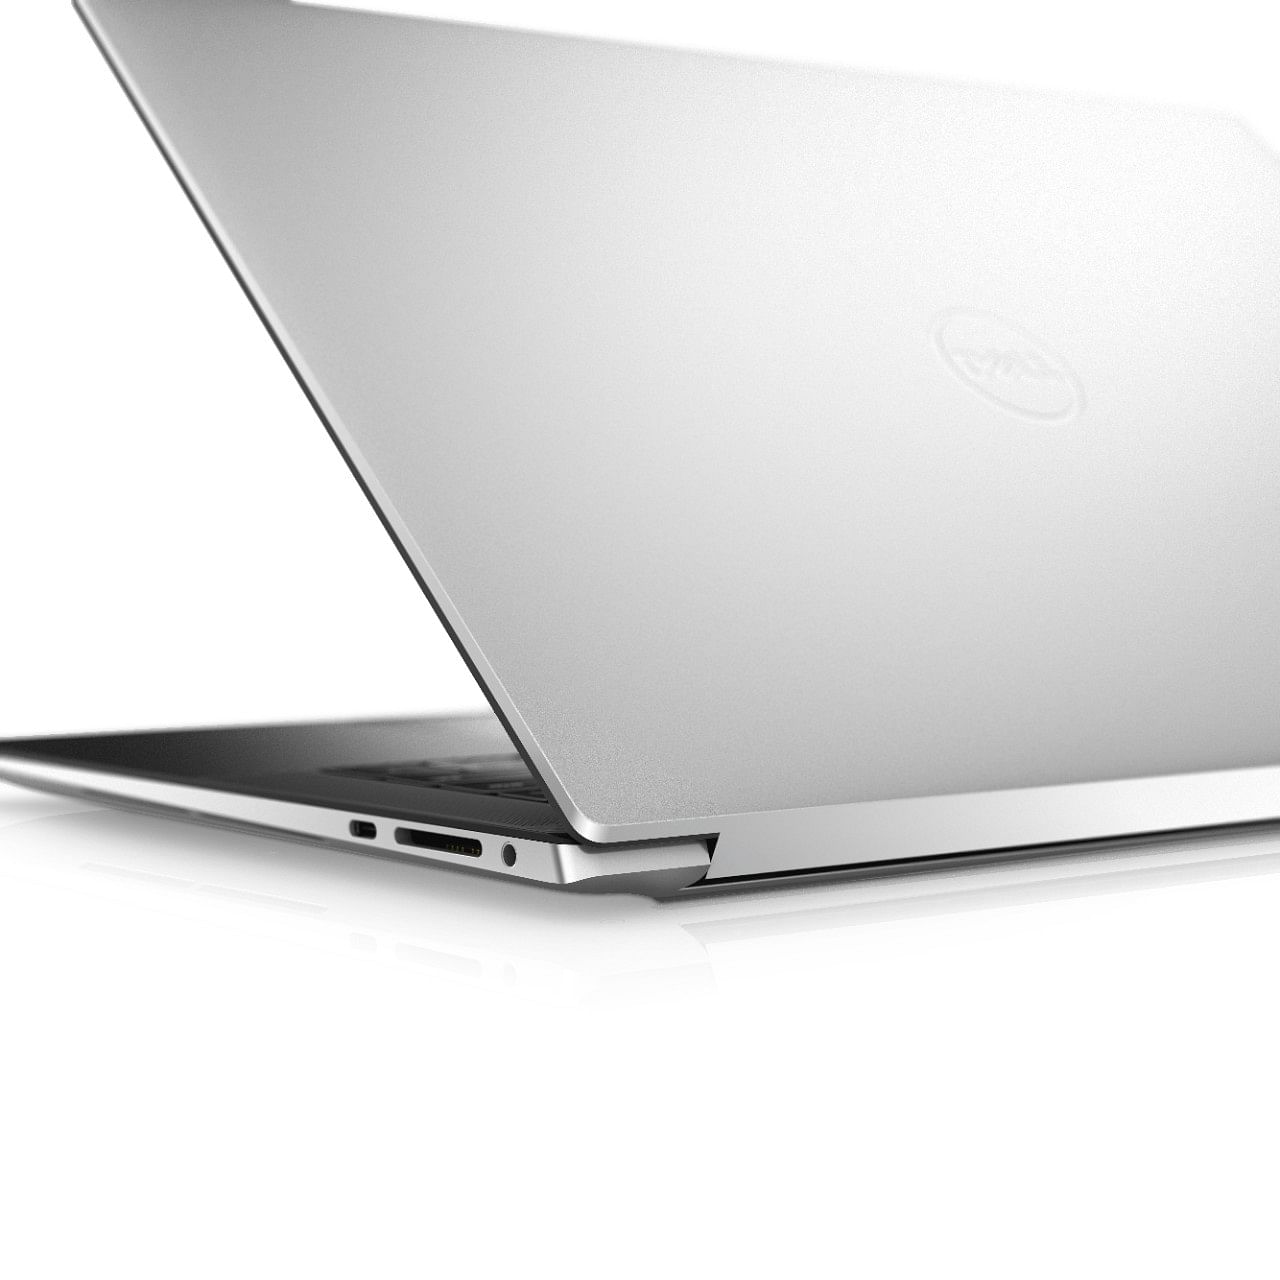 The Dell XPS 15 9500. Image: Dell